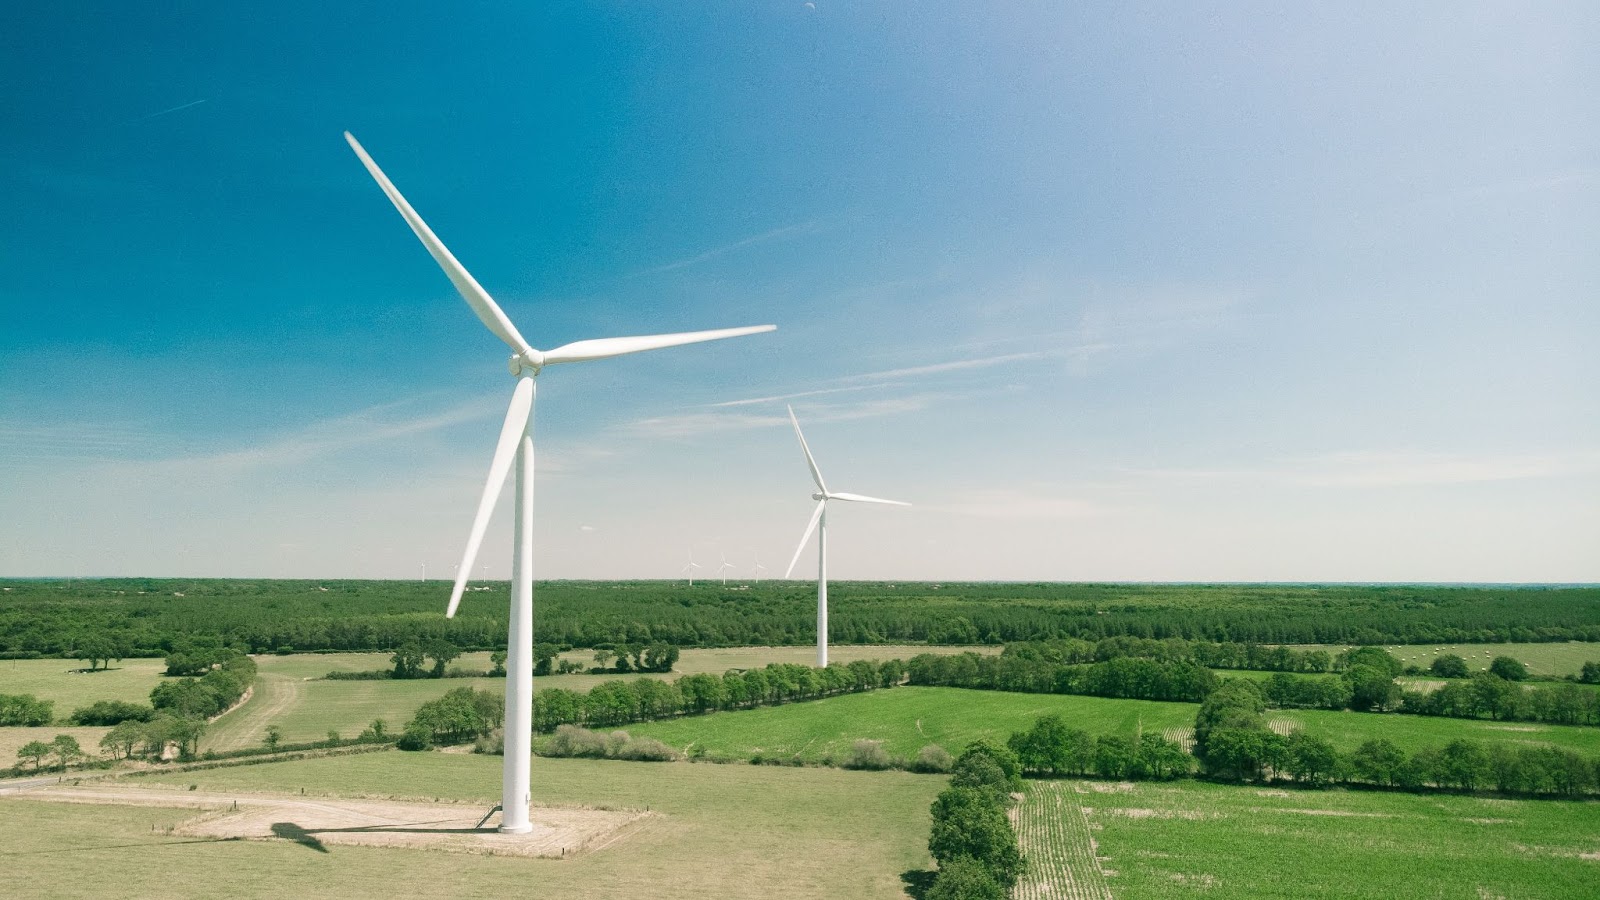 Becoming a wind turbine technician is ideal for those passionate about renewable energy